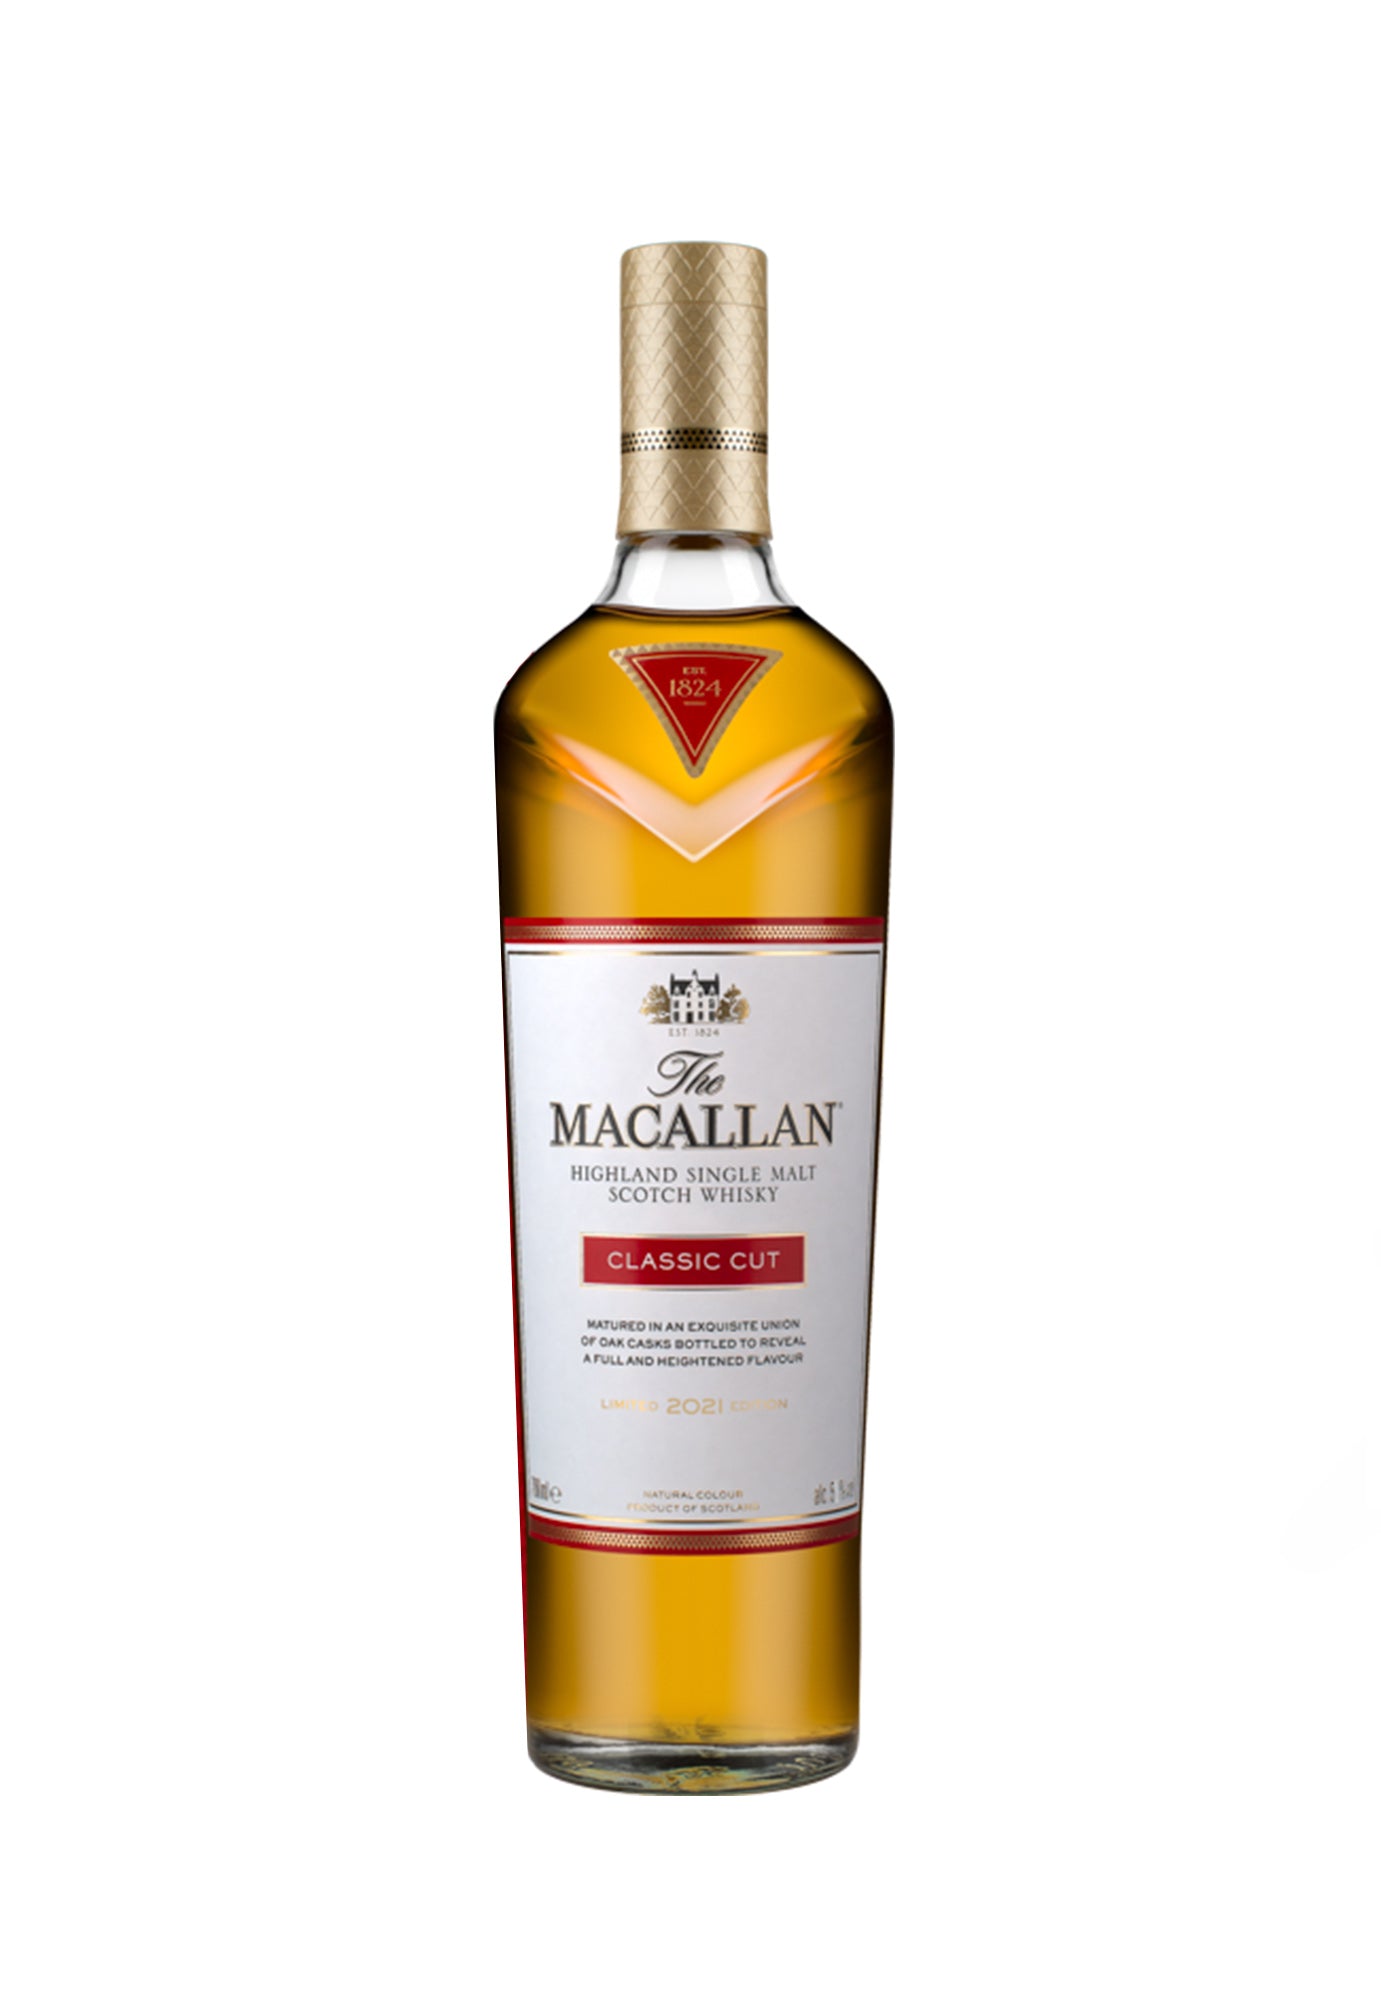 The Macallan Classic Cut - Limited 2021 Edition